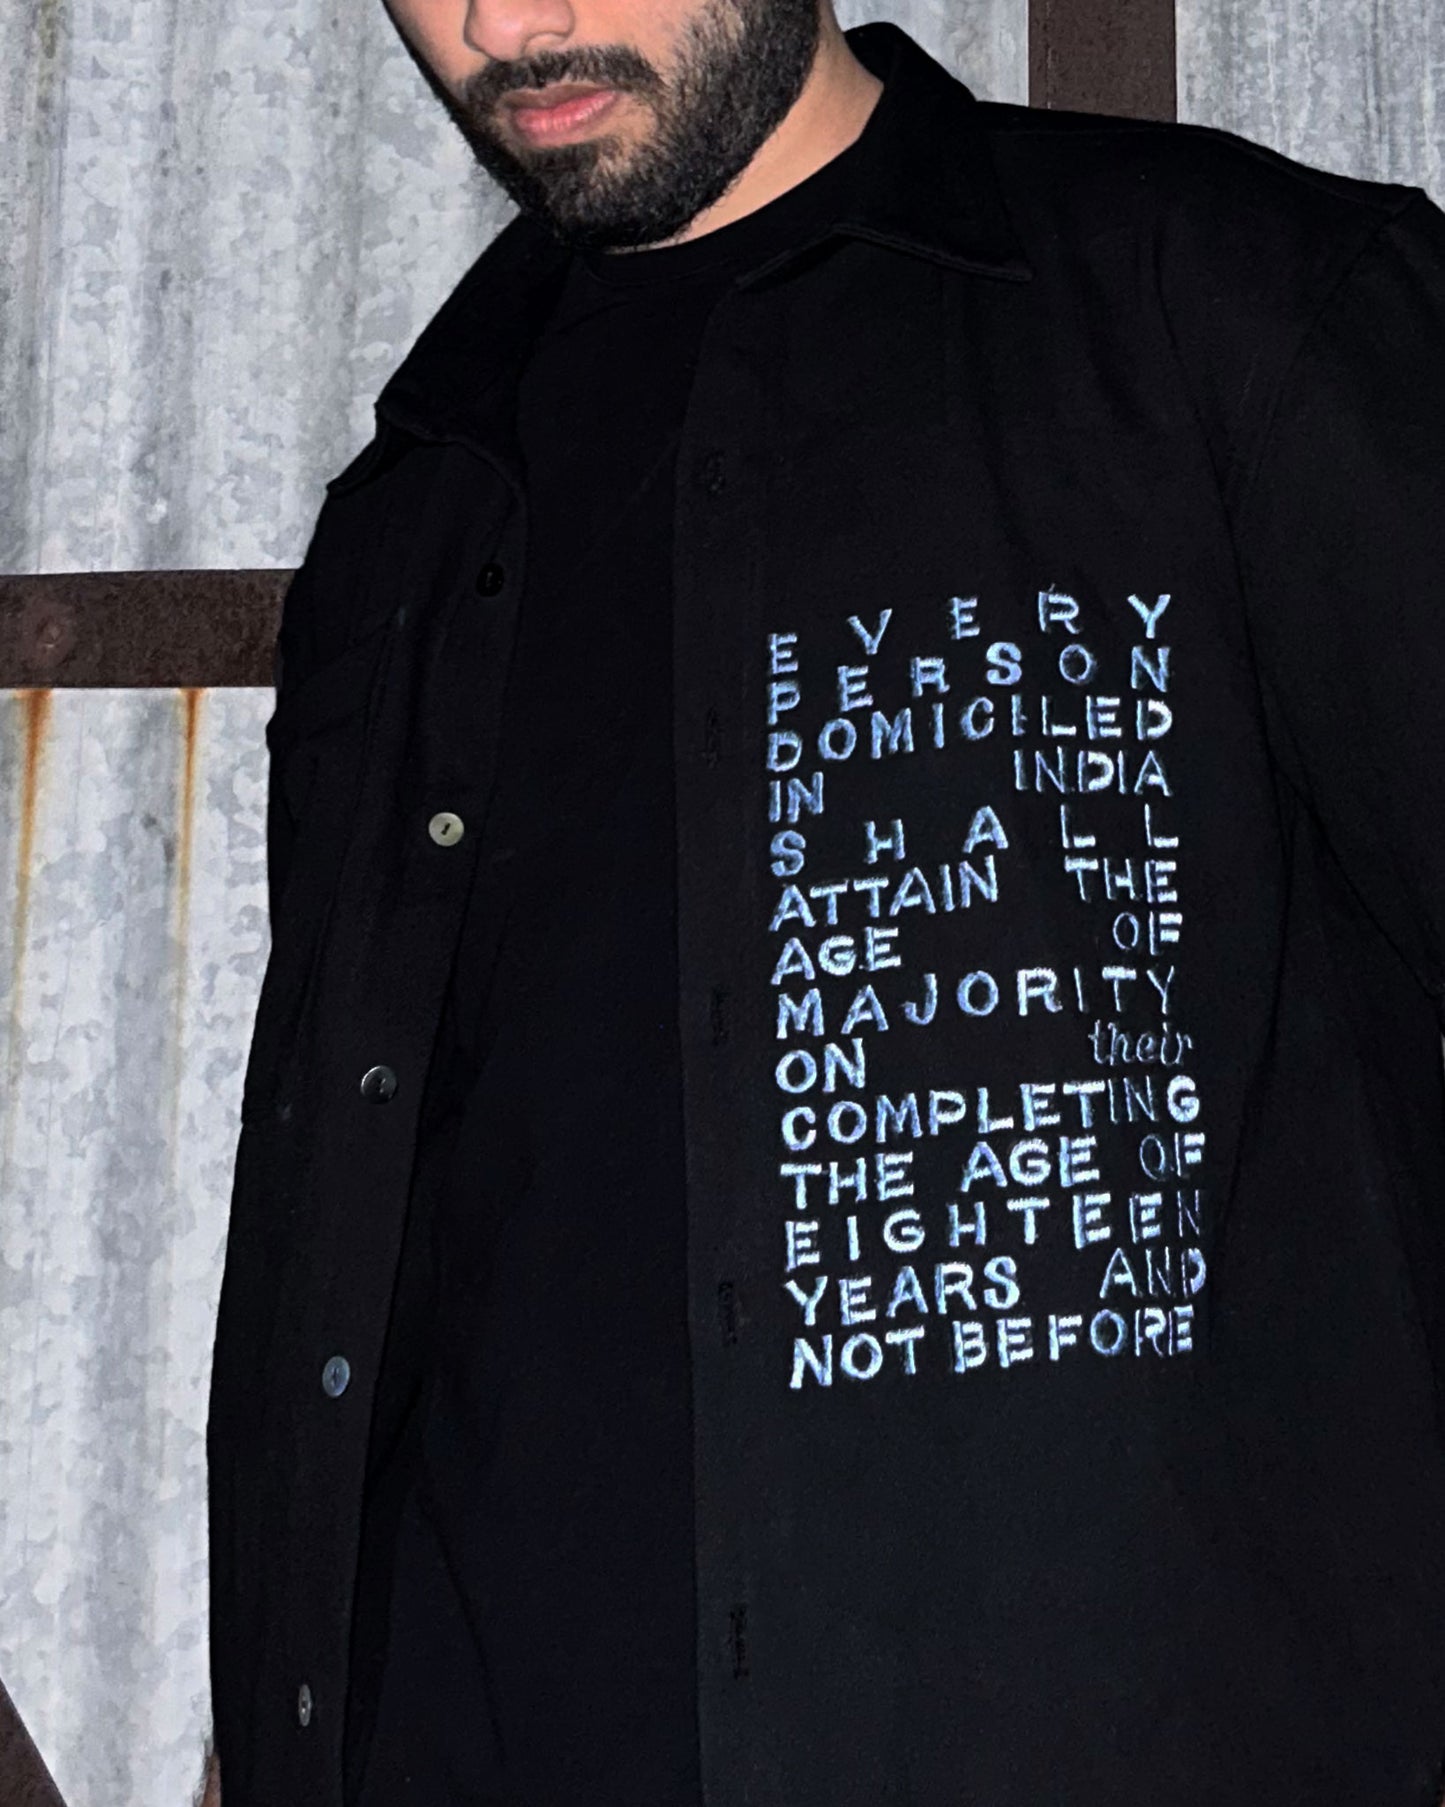 Model wearing Majority Act Black Shirt with Embroidered Text